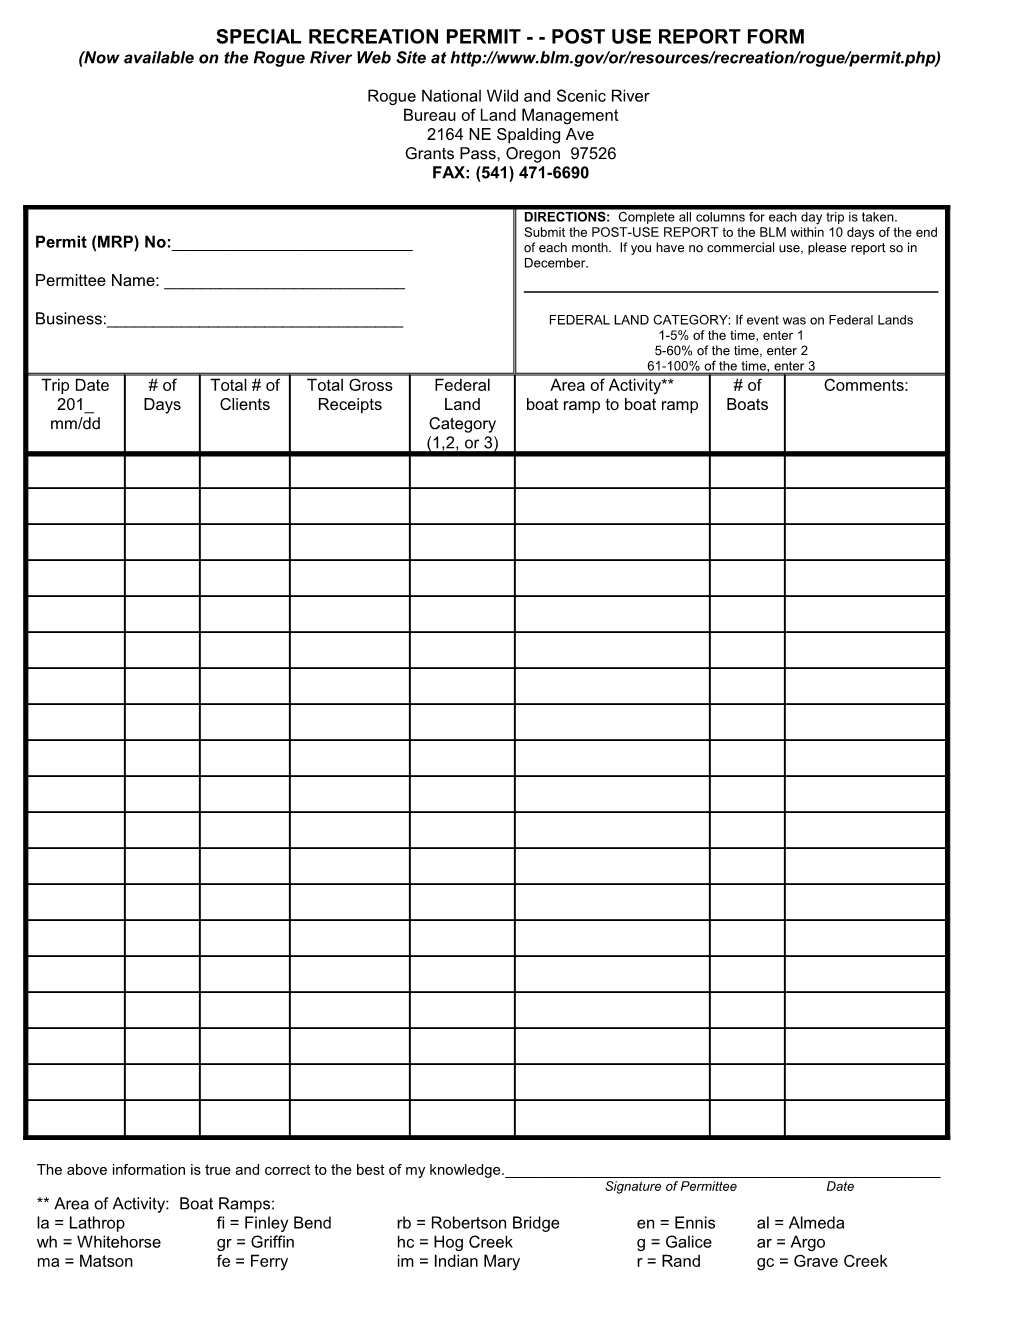 Special Recreation Permit - - Post Use Report Form